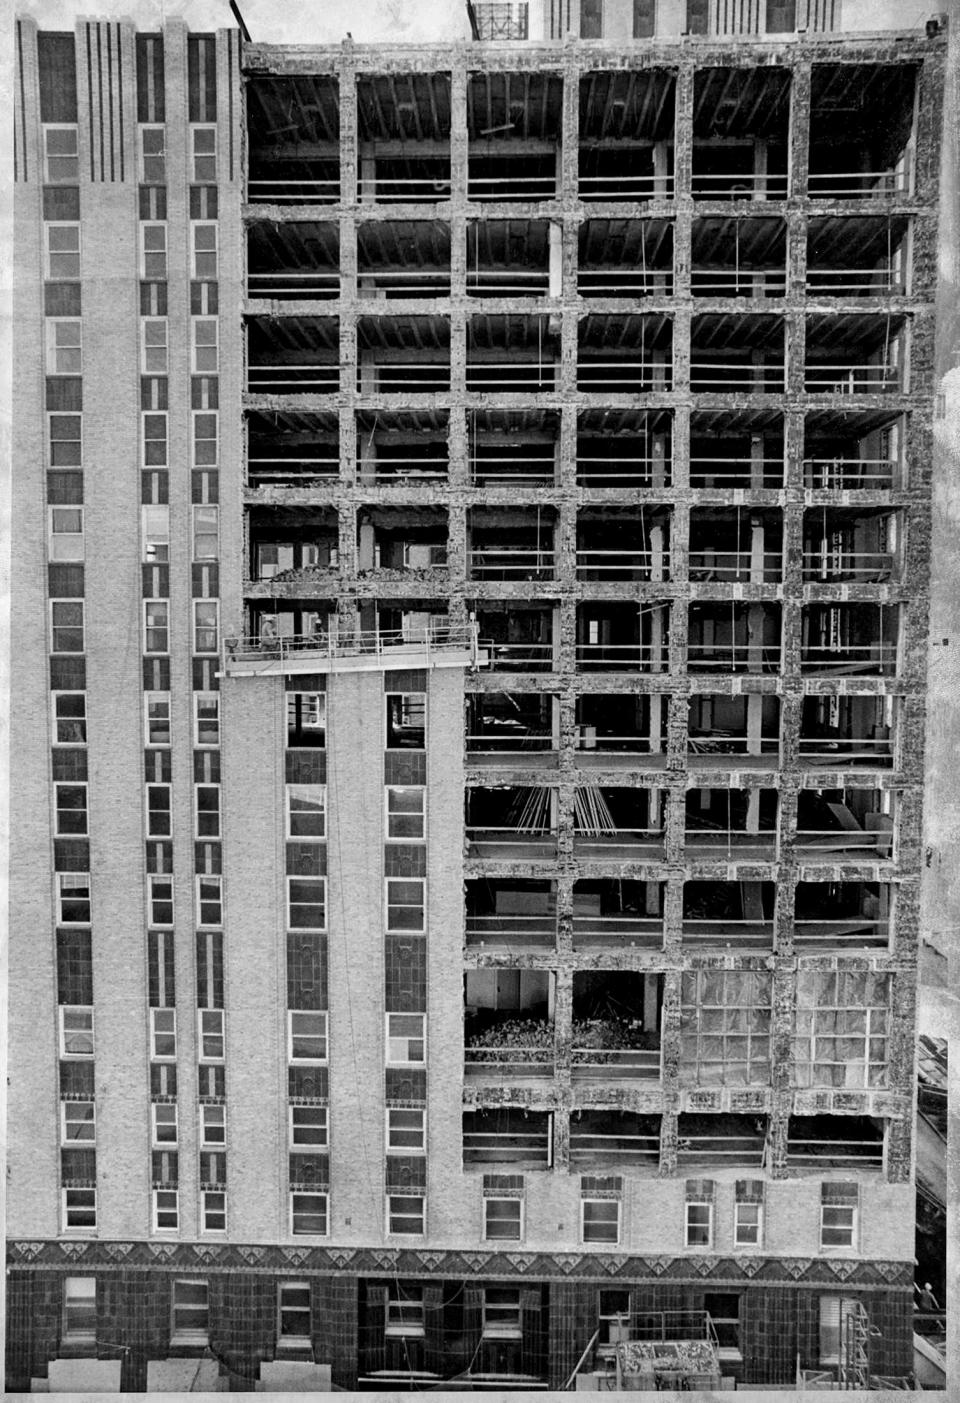 'We are going back to the concrete frame,' John Martin, the building manager of Oklahoma City Federal Savings & Loan Association, said of the company's 1973 renovation of the Skirvin Tower.